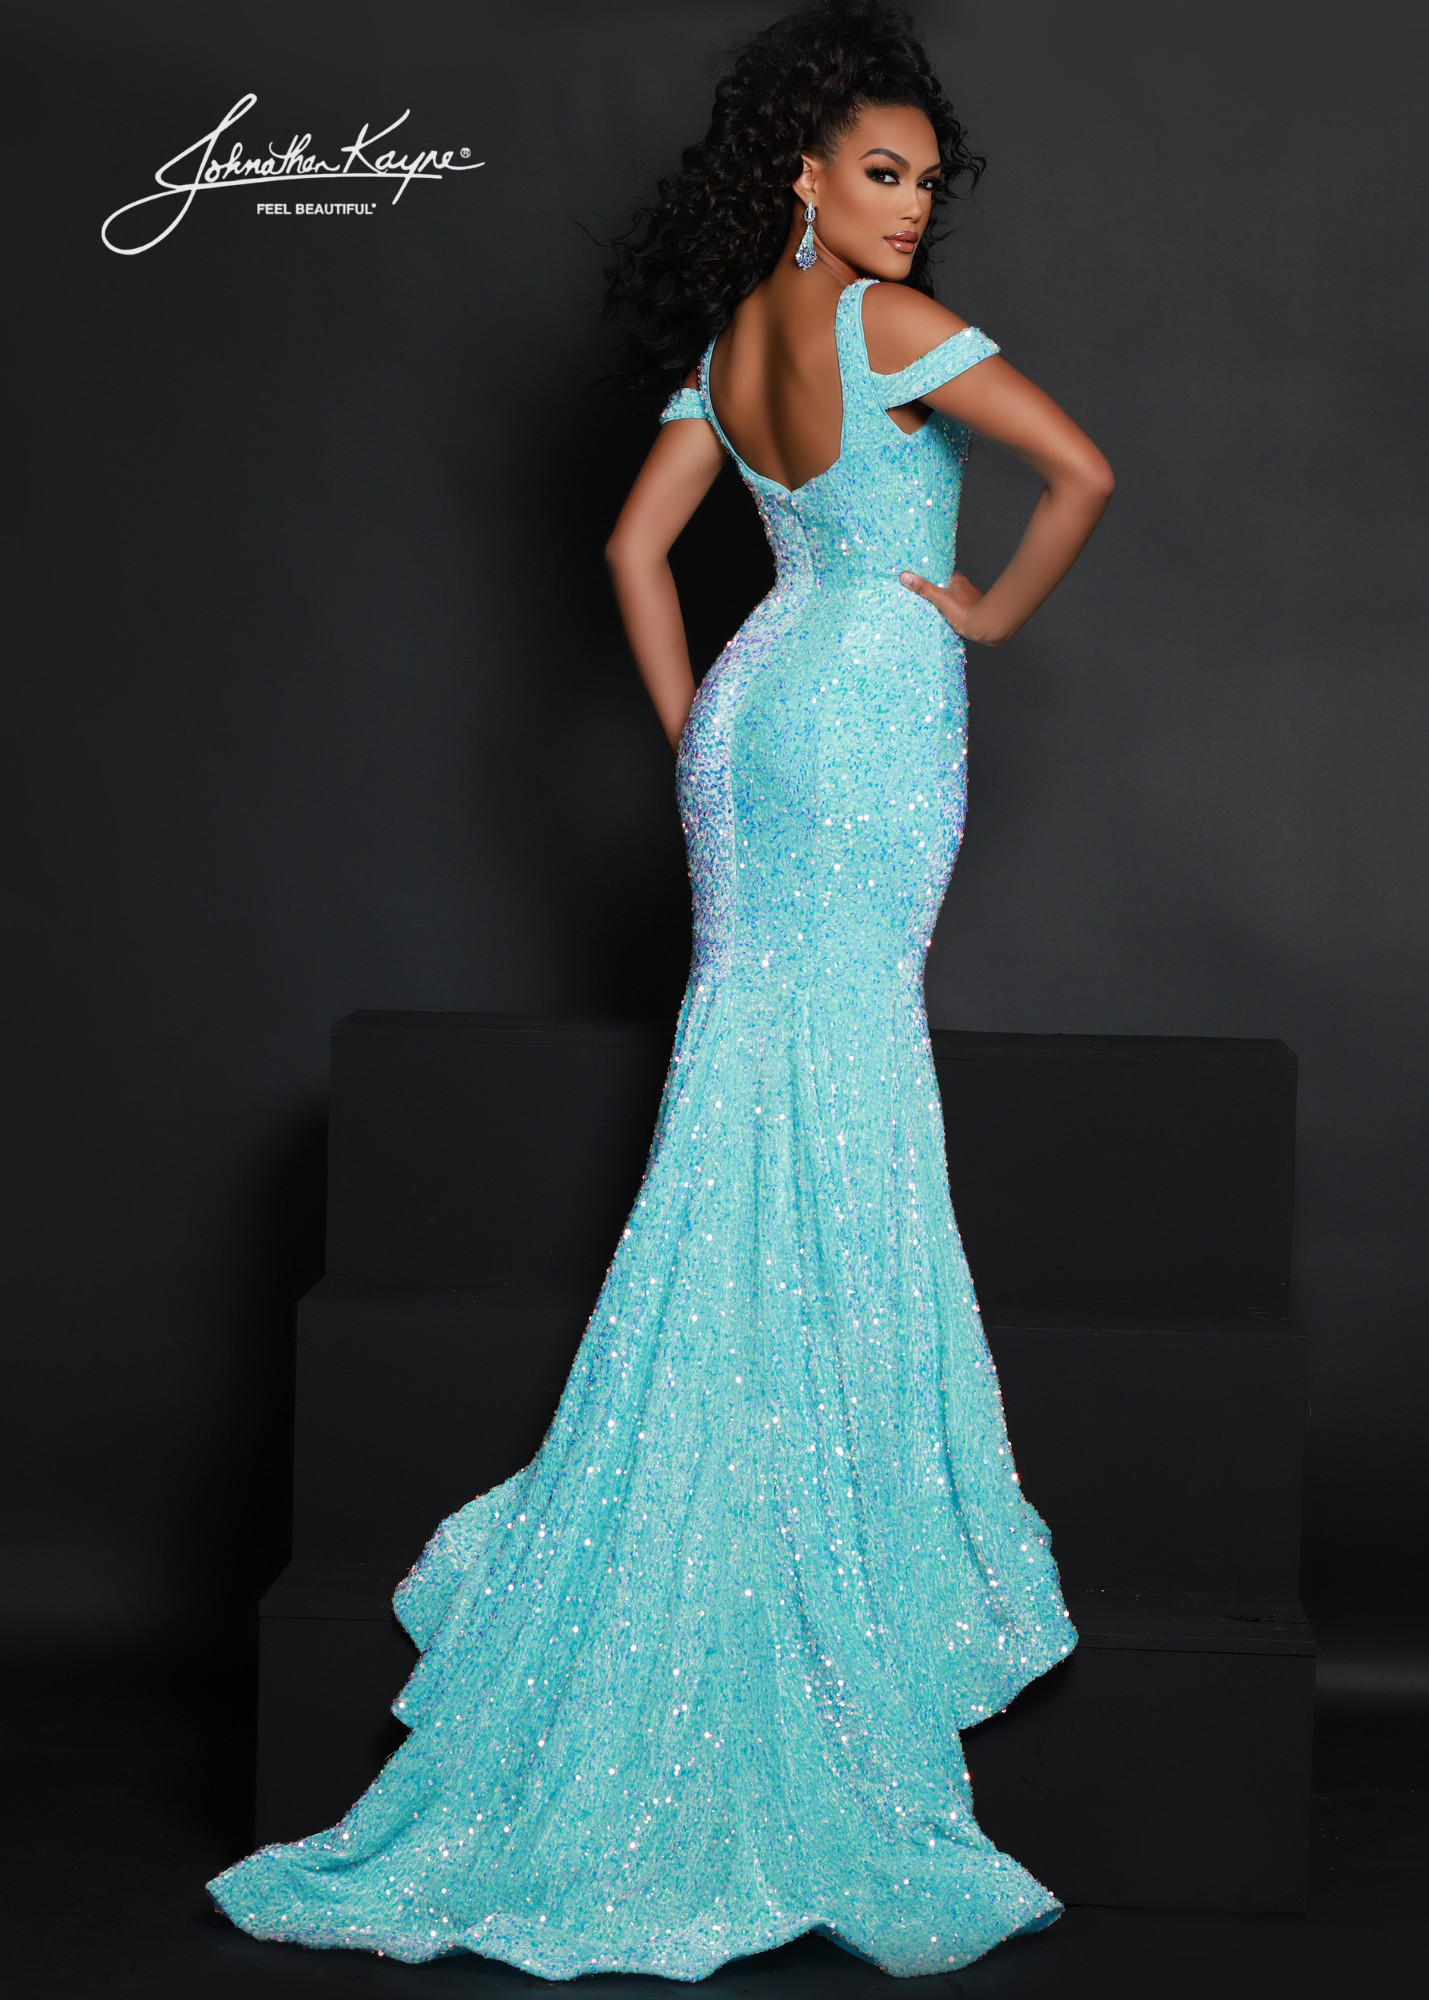 Johnathan Kayne 2678 sequin stretch velvet gown with off shoulder straps Johnathan Kayne 2678 Size 4 Aqua sequin stretch velvet Pageant gown Formal Dress  Available Sizes: 4  Available Colors: Aqua